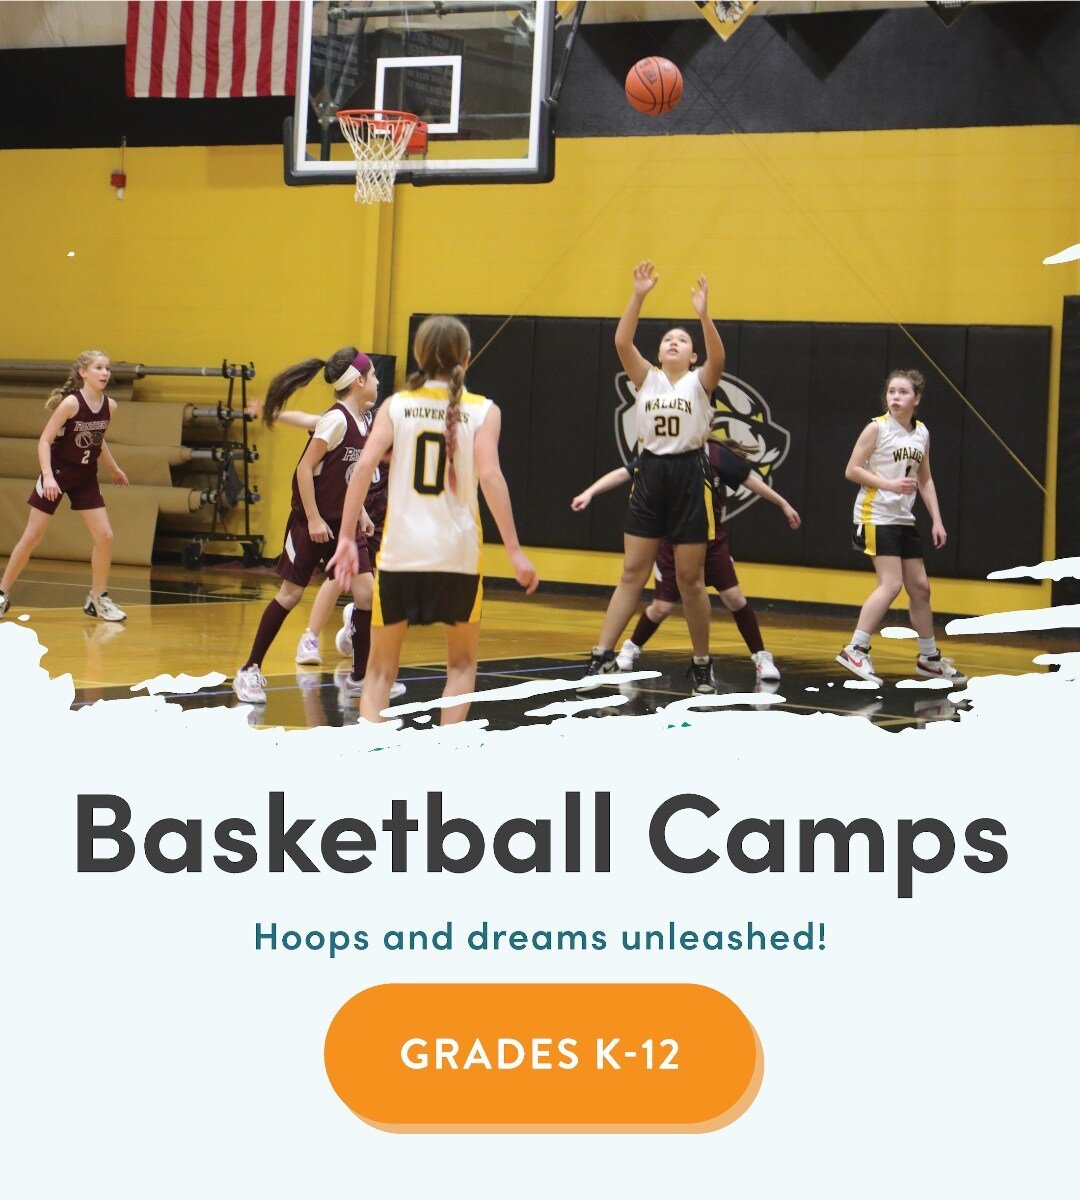 Don't stay cooped up inside this summer! Sign up for physical and mental fun at a Camp Walden athletic or game camp. 🏀 #campwaldenschool #summercamp